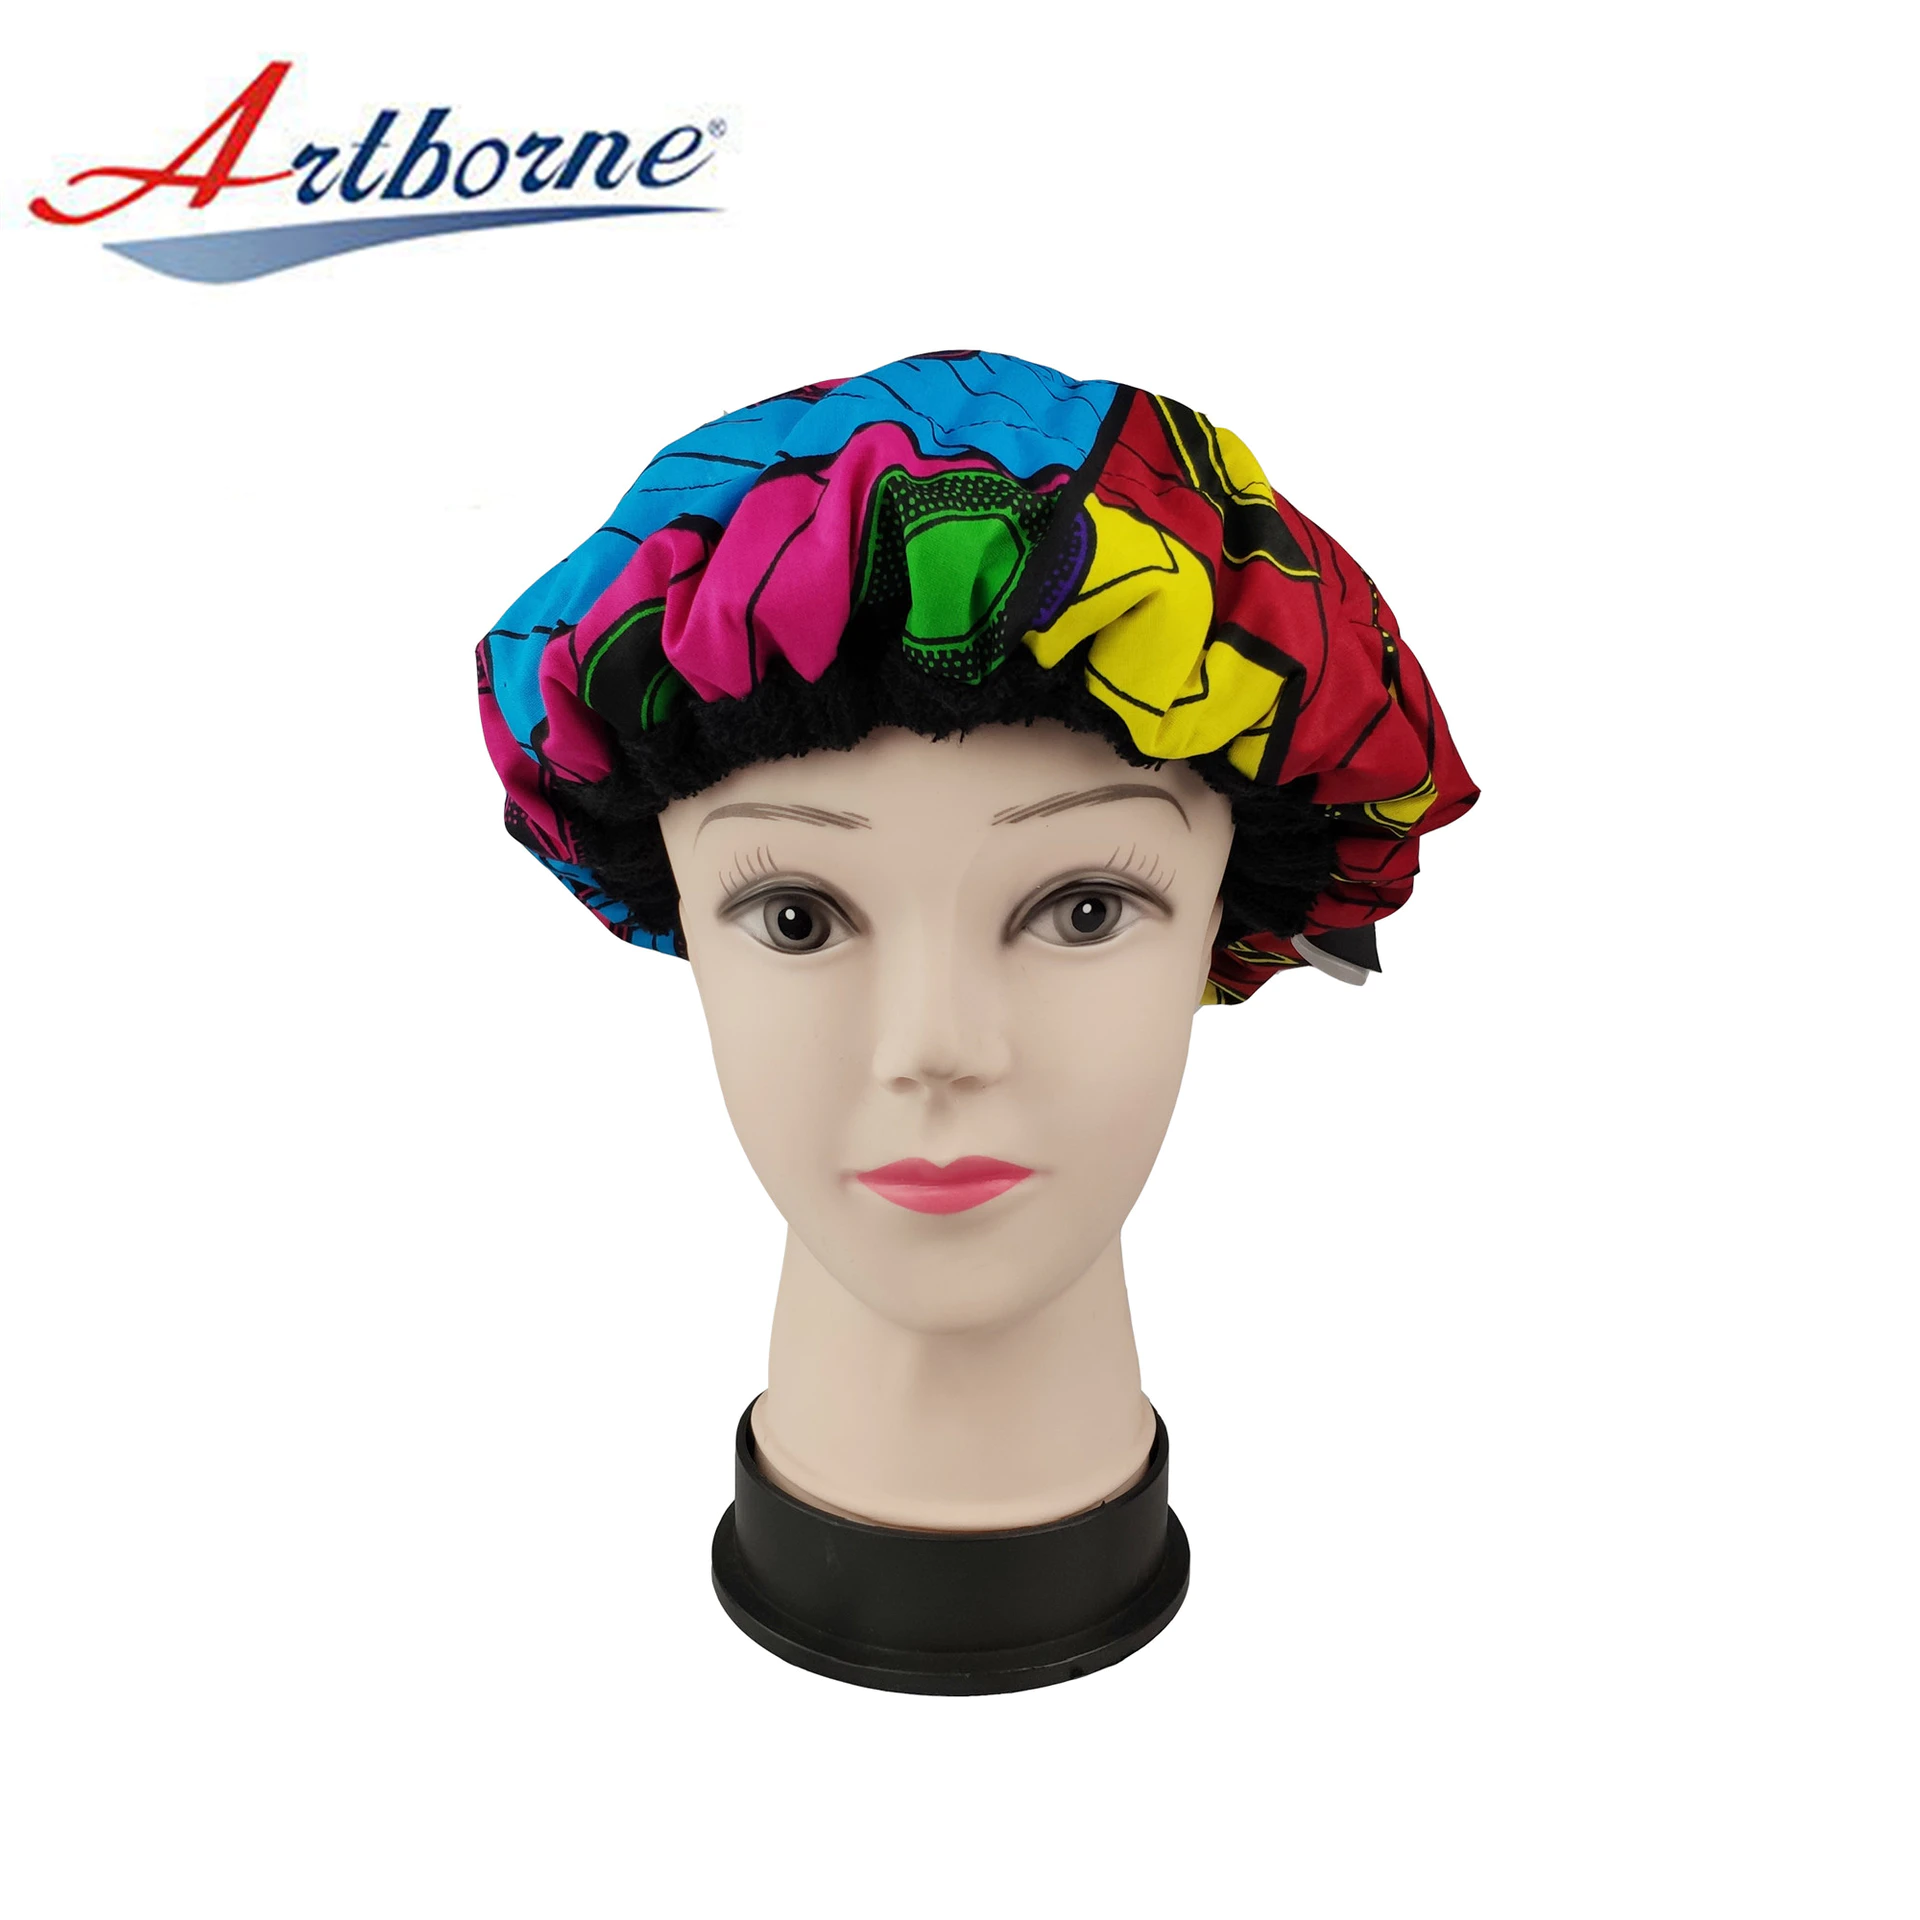 Cordless Reusable Thermal Therapy Microwavable Flaxseed Heat Heating Conditioning Hot Hat Cap Bonnet for Hair